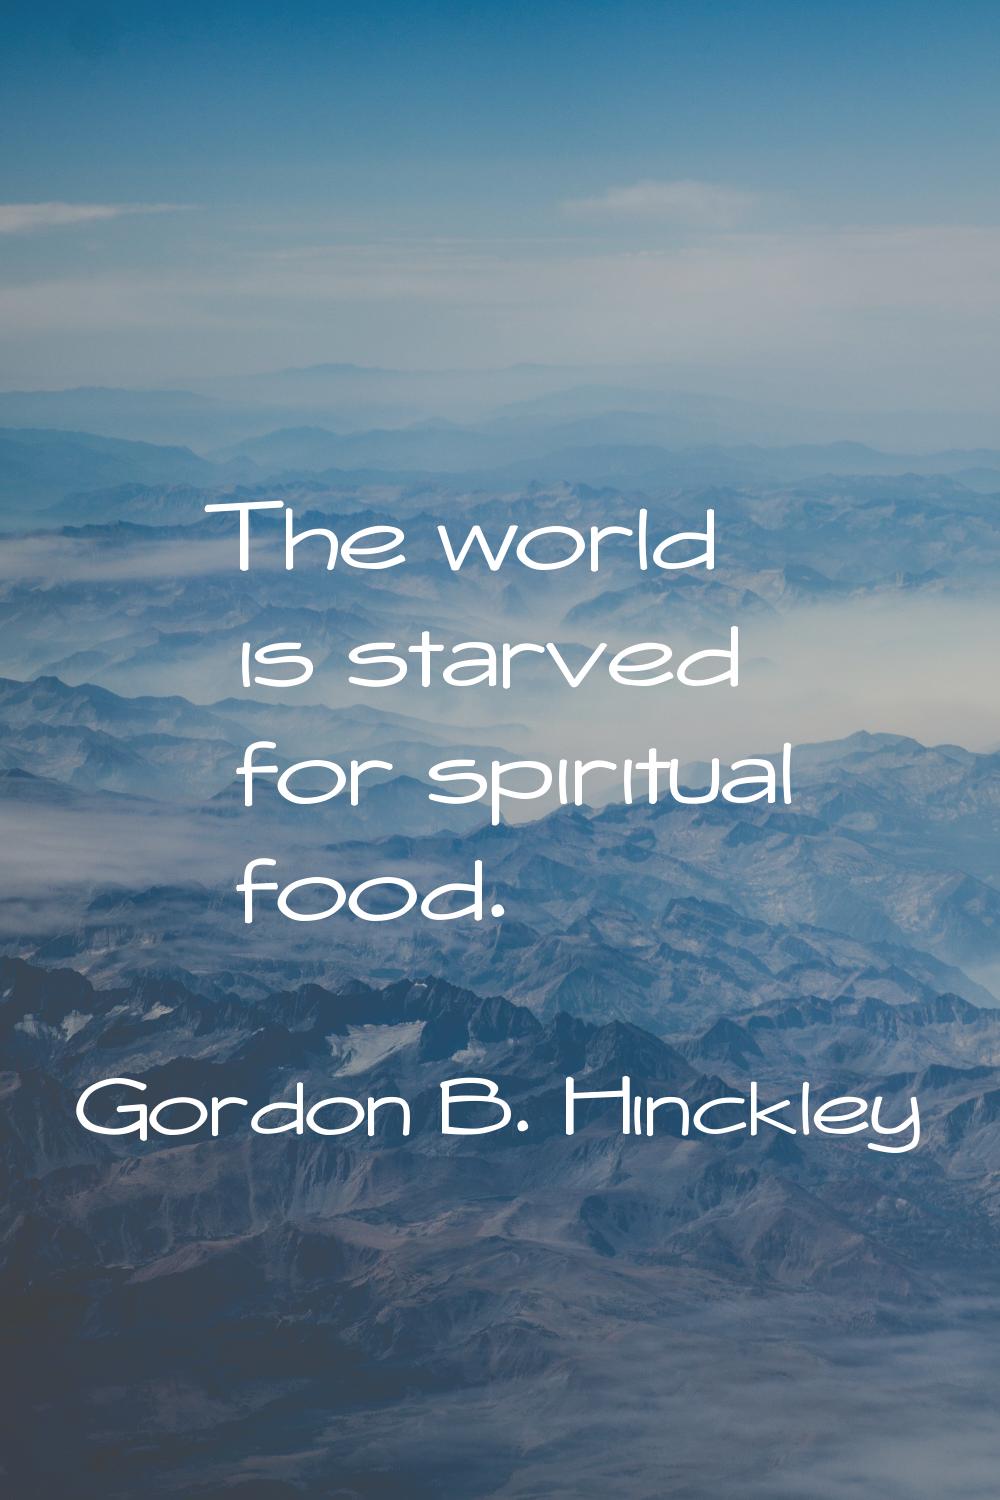 The world is starved for spiritual food.